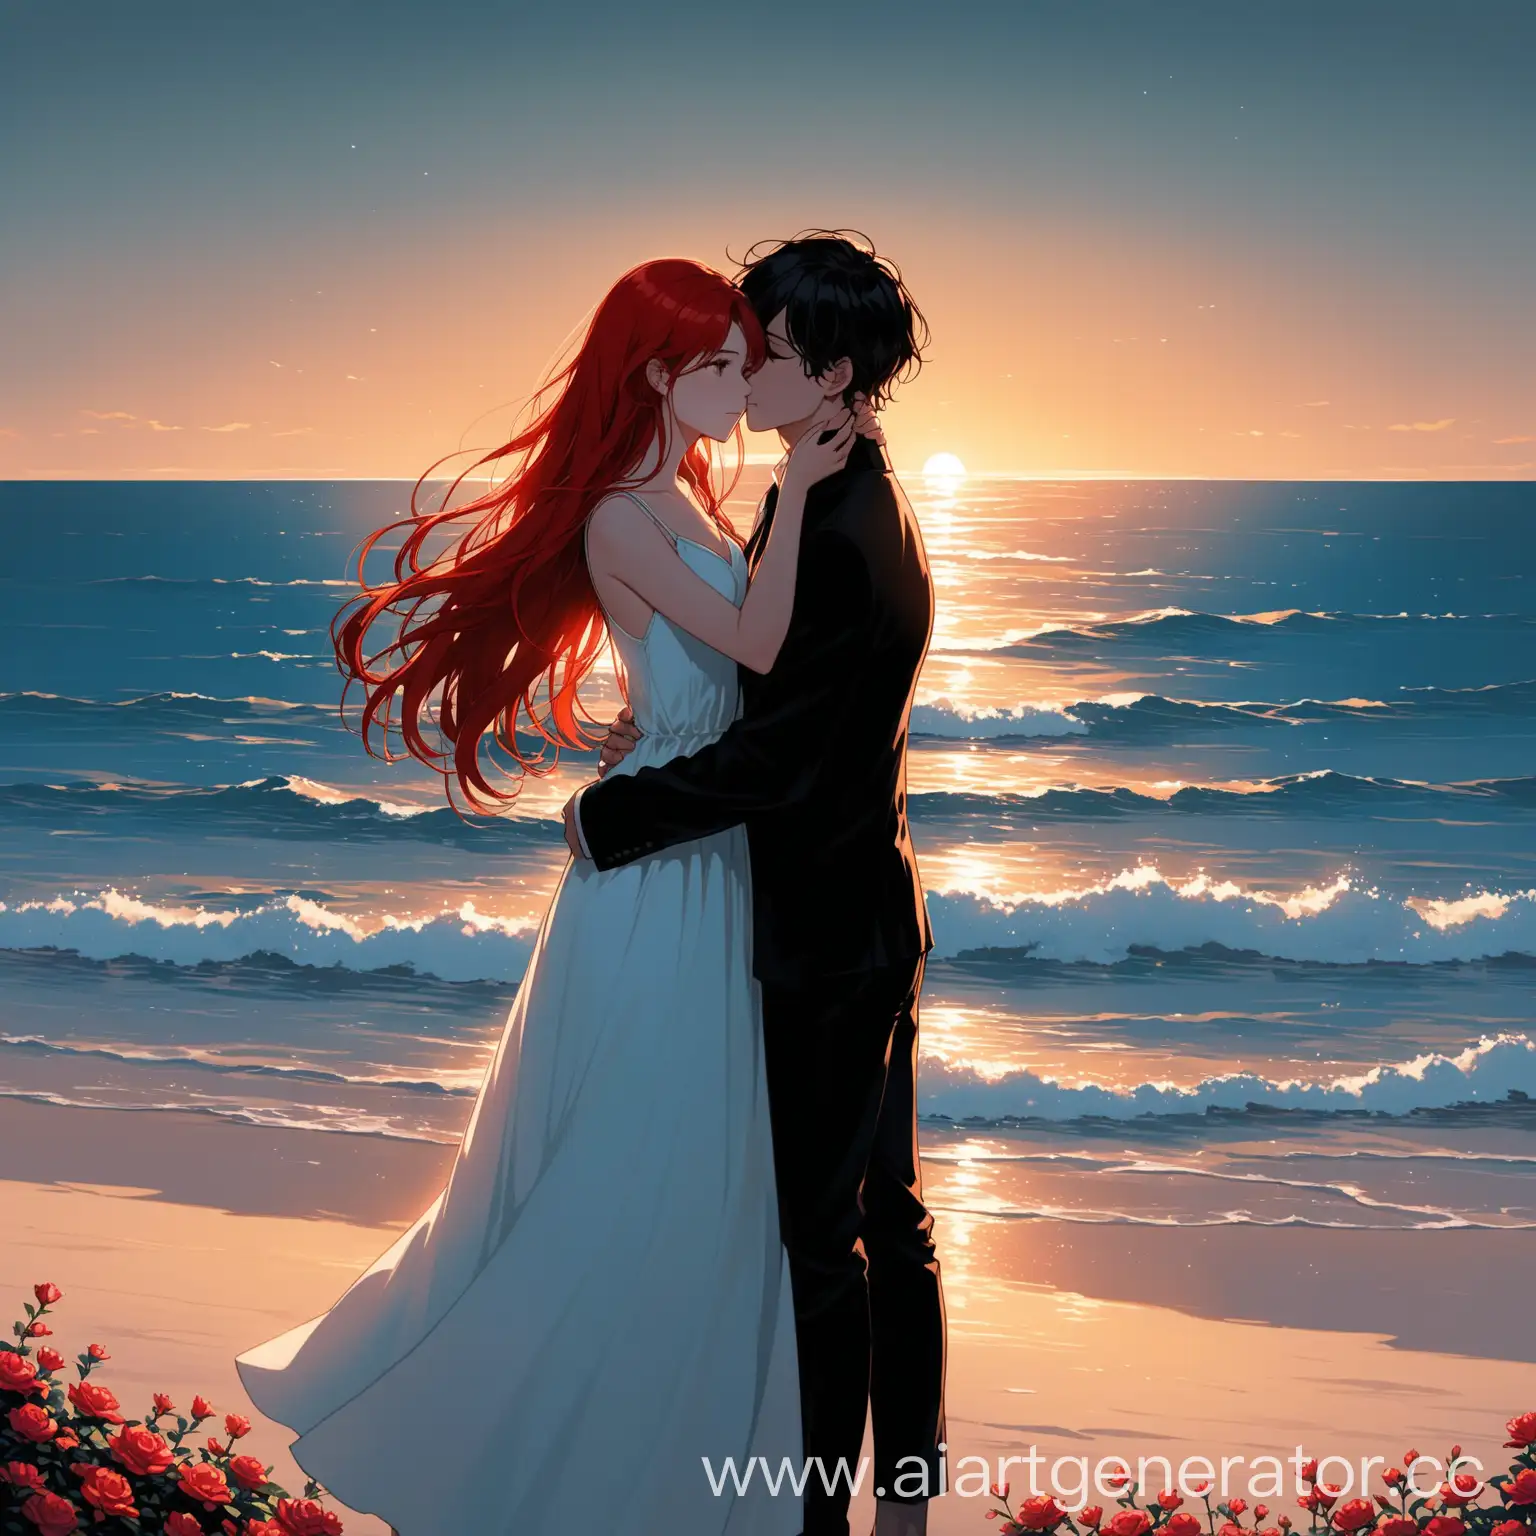 Young-Couple-on-Beach-at-Dusk-Romantic-Moment-with-Short-Redhaired-Girl-and-Young-Boy-in-Black